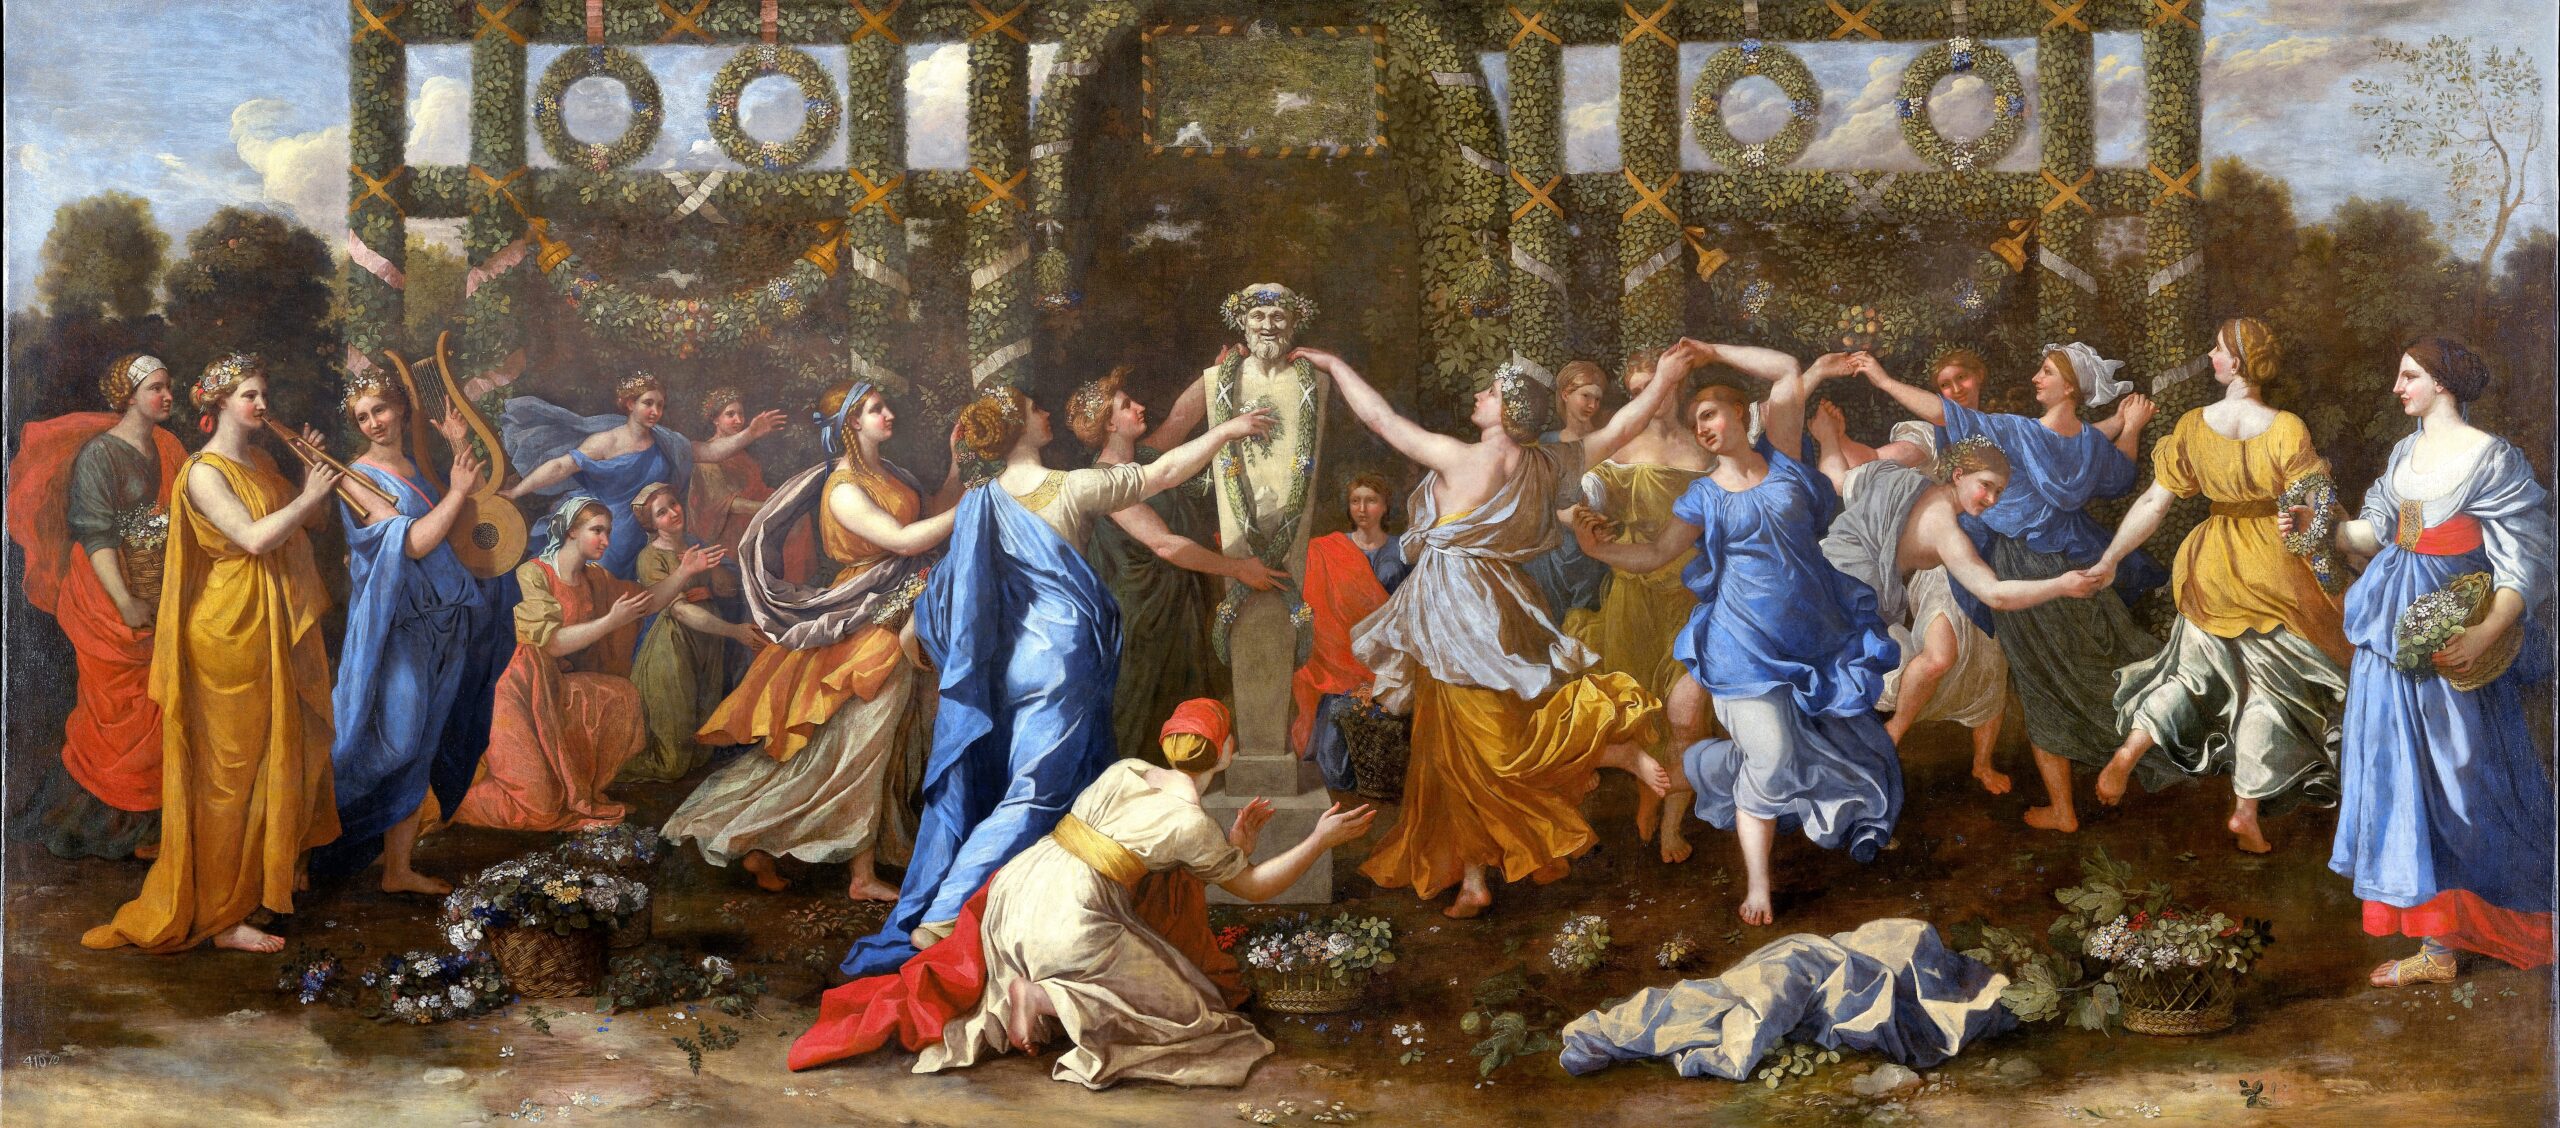 Poussin-1634-38-Hymenaeus-Disguised-as-a-Woman-During-an-Offering-to-Priapus-Sao-Paulo-Museum-of-art